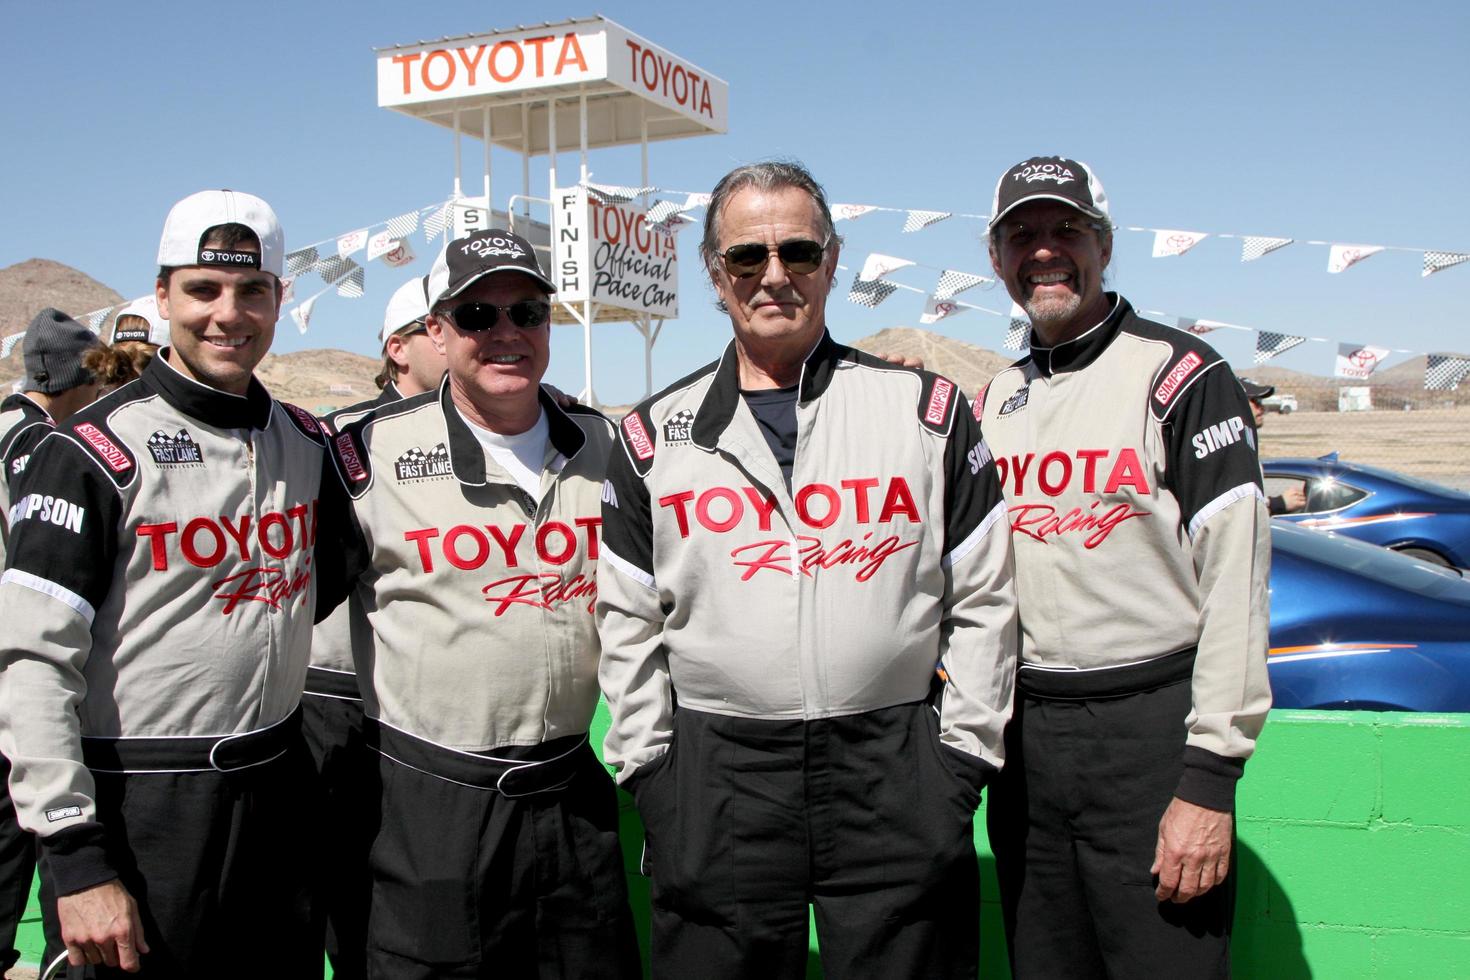 LOS ANGELES - MAR 15 - Colin Egglesfield, Al Unser Jr, Eric Braeden, Kyle Petty at the Toyota Grand Prix of Long Beach Pro-Celebrity Race Training at Willow Springs International Speedway on March 15, 2014 in Rosamond, CA photo